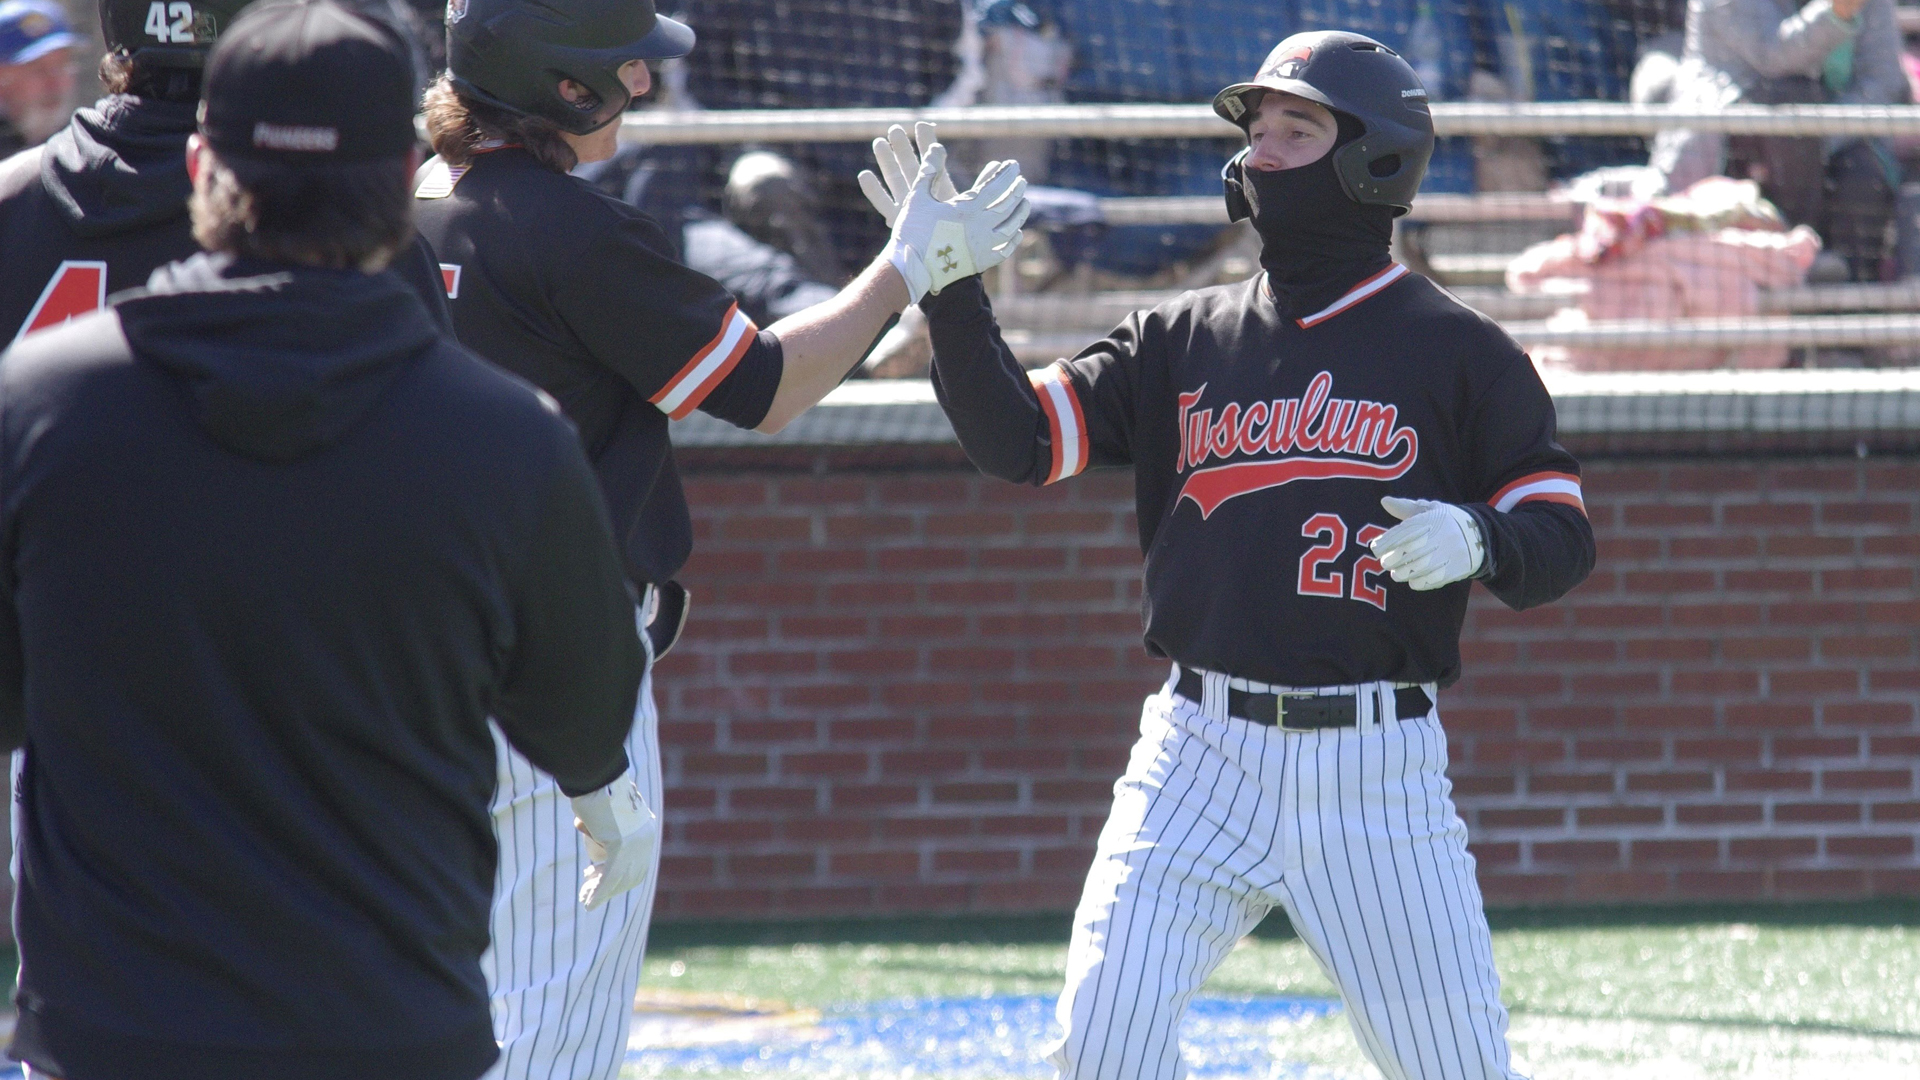 Zane Keener celebrates his game-winning HR in Saturday's first game at Mars Hill (photo by Chris Lenker)